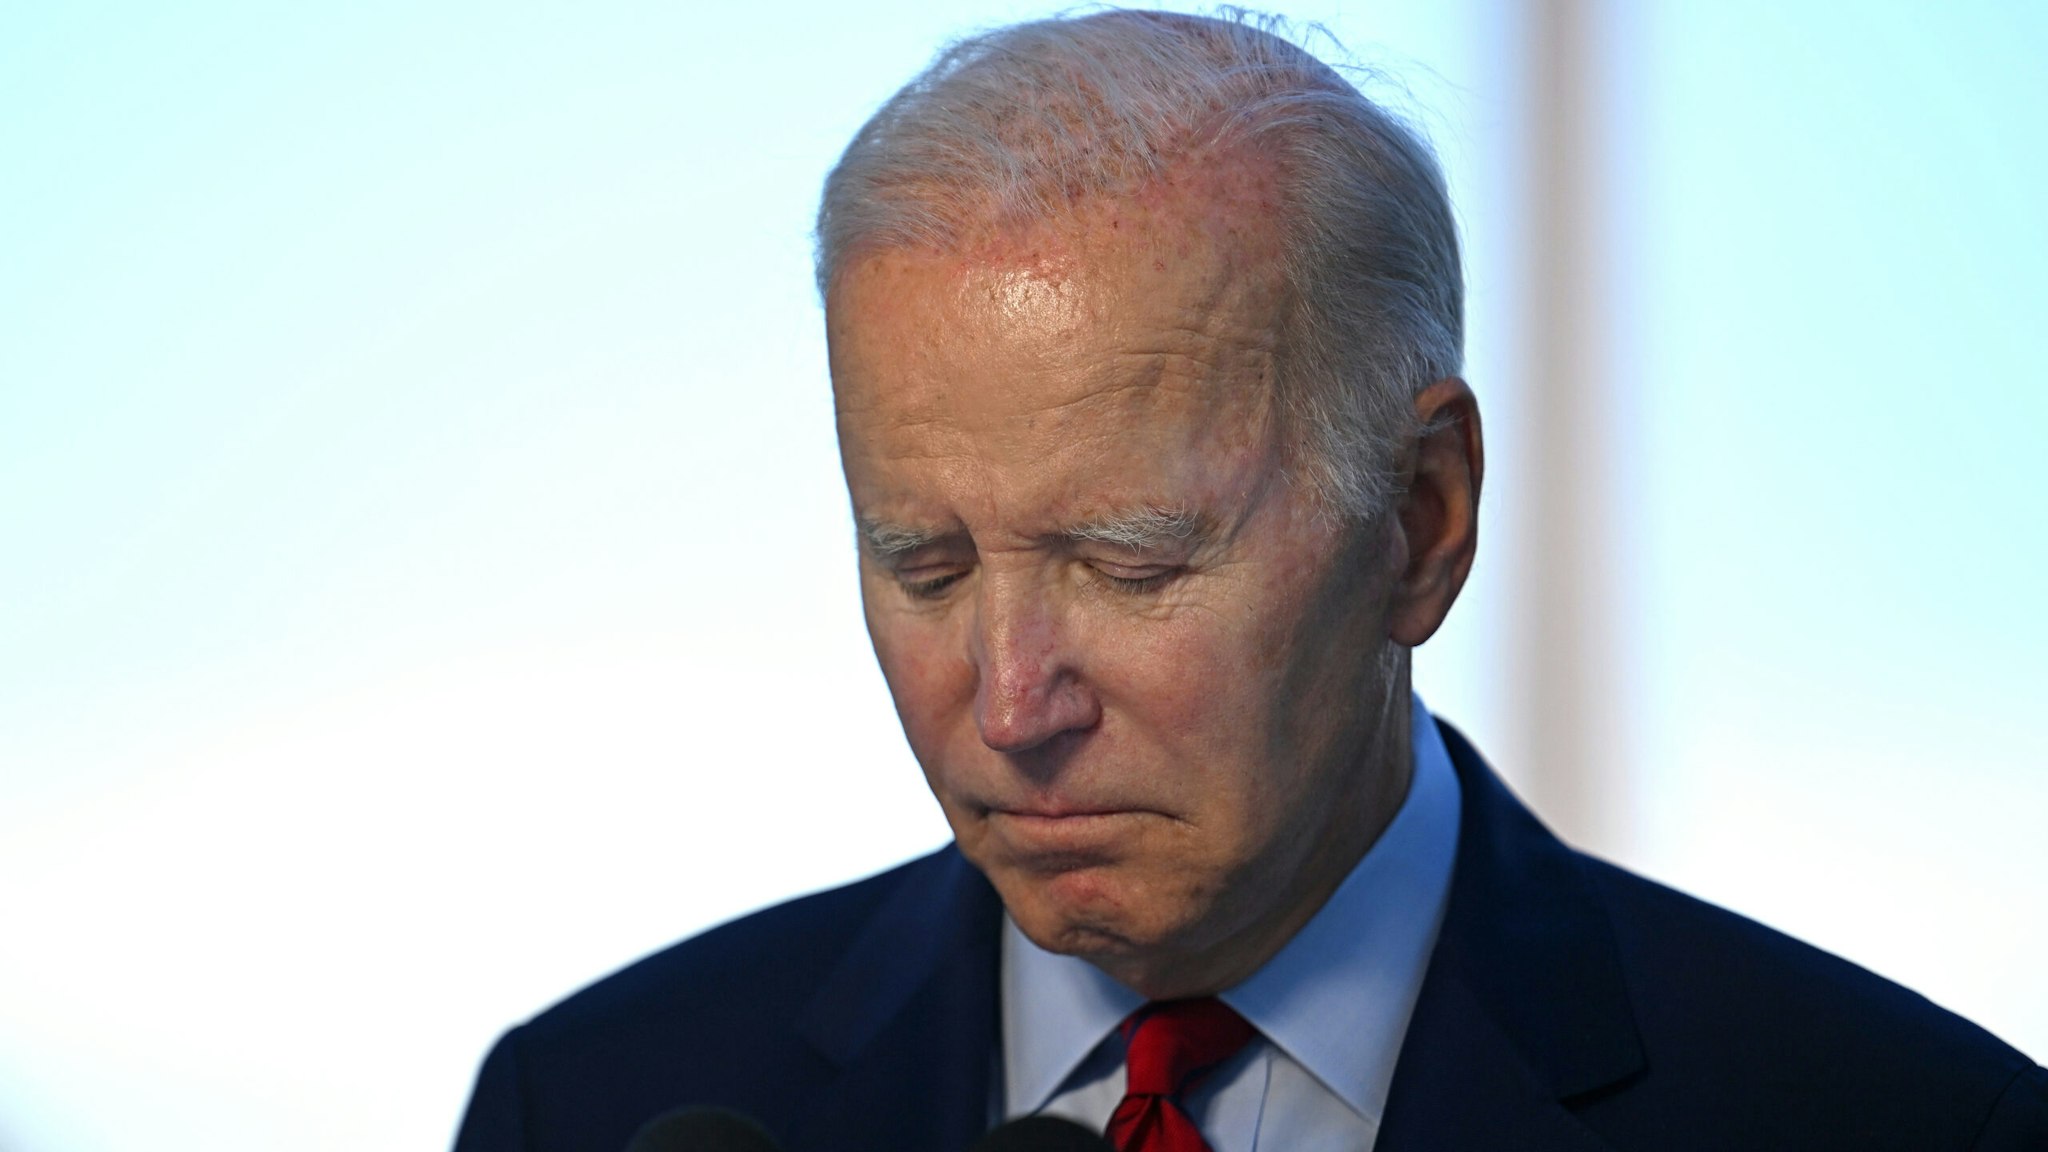 US President Joe Biden after speaking from the Blue Room Balcony of the White House in Washington, D.C, US, on Monday, Aug. 1, 2022. A US counterterrorism operation in Afghanistan over the weekend killed the leader of al-Qaeda, Ayman Al-Zawahiri, Biden announced.